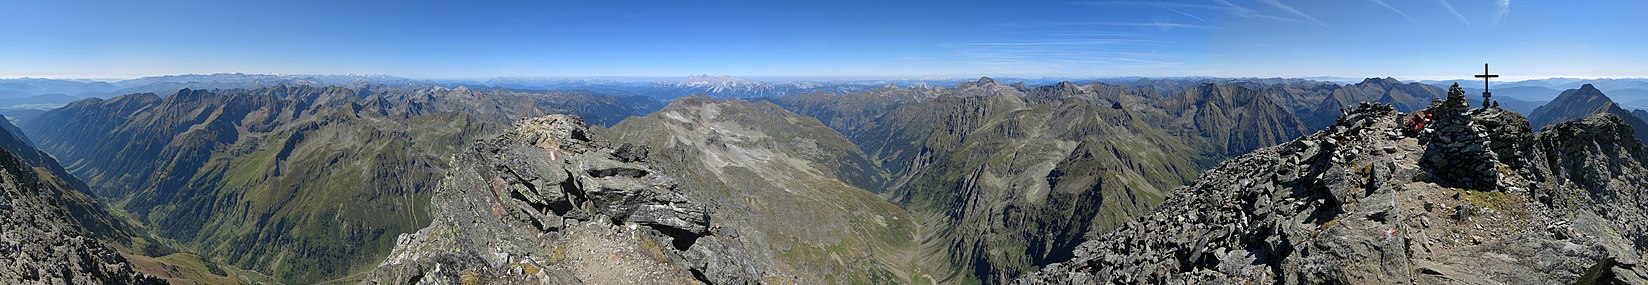 Panoramic view from the summit